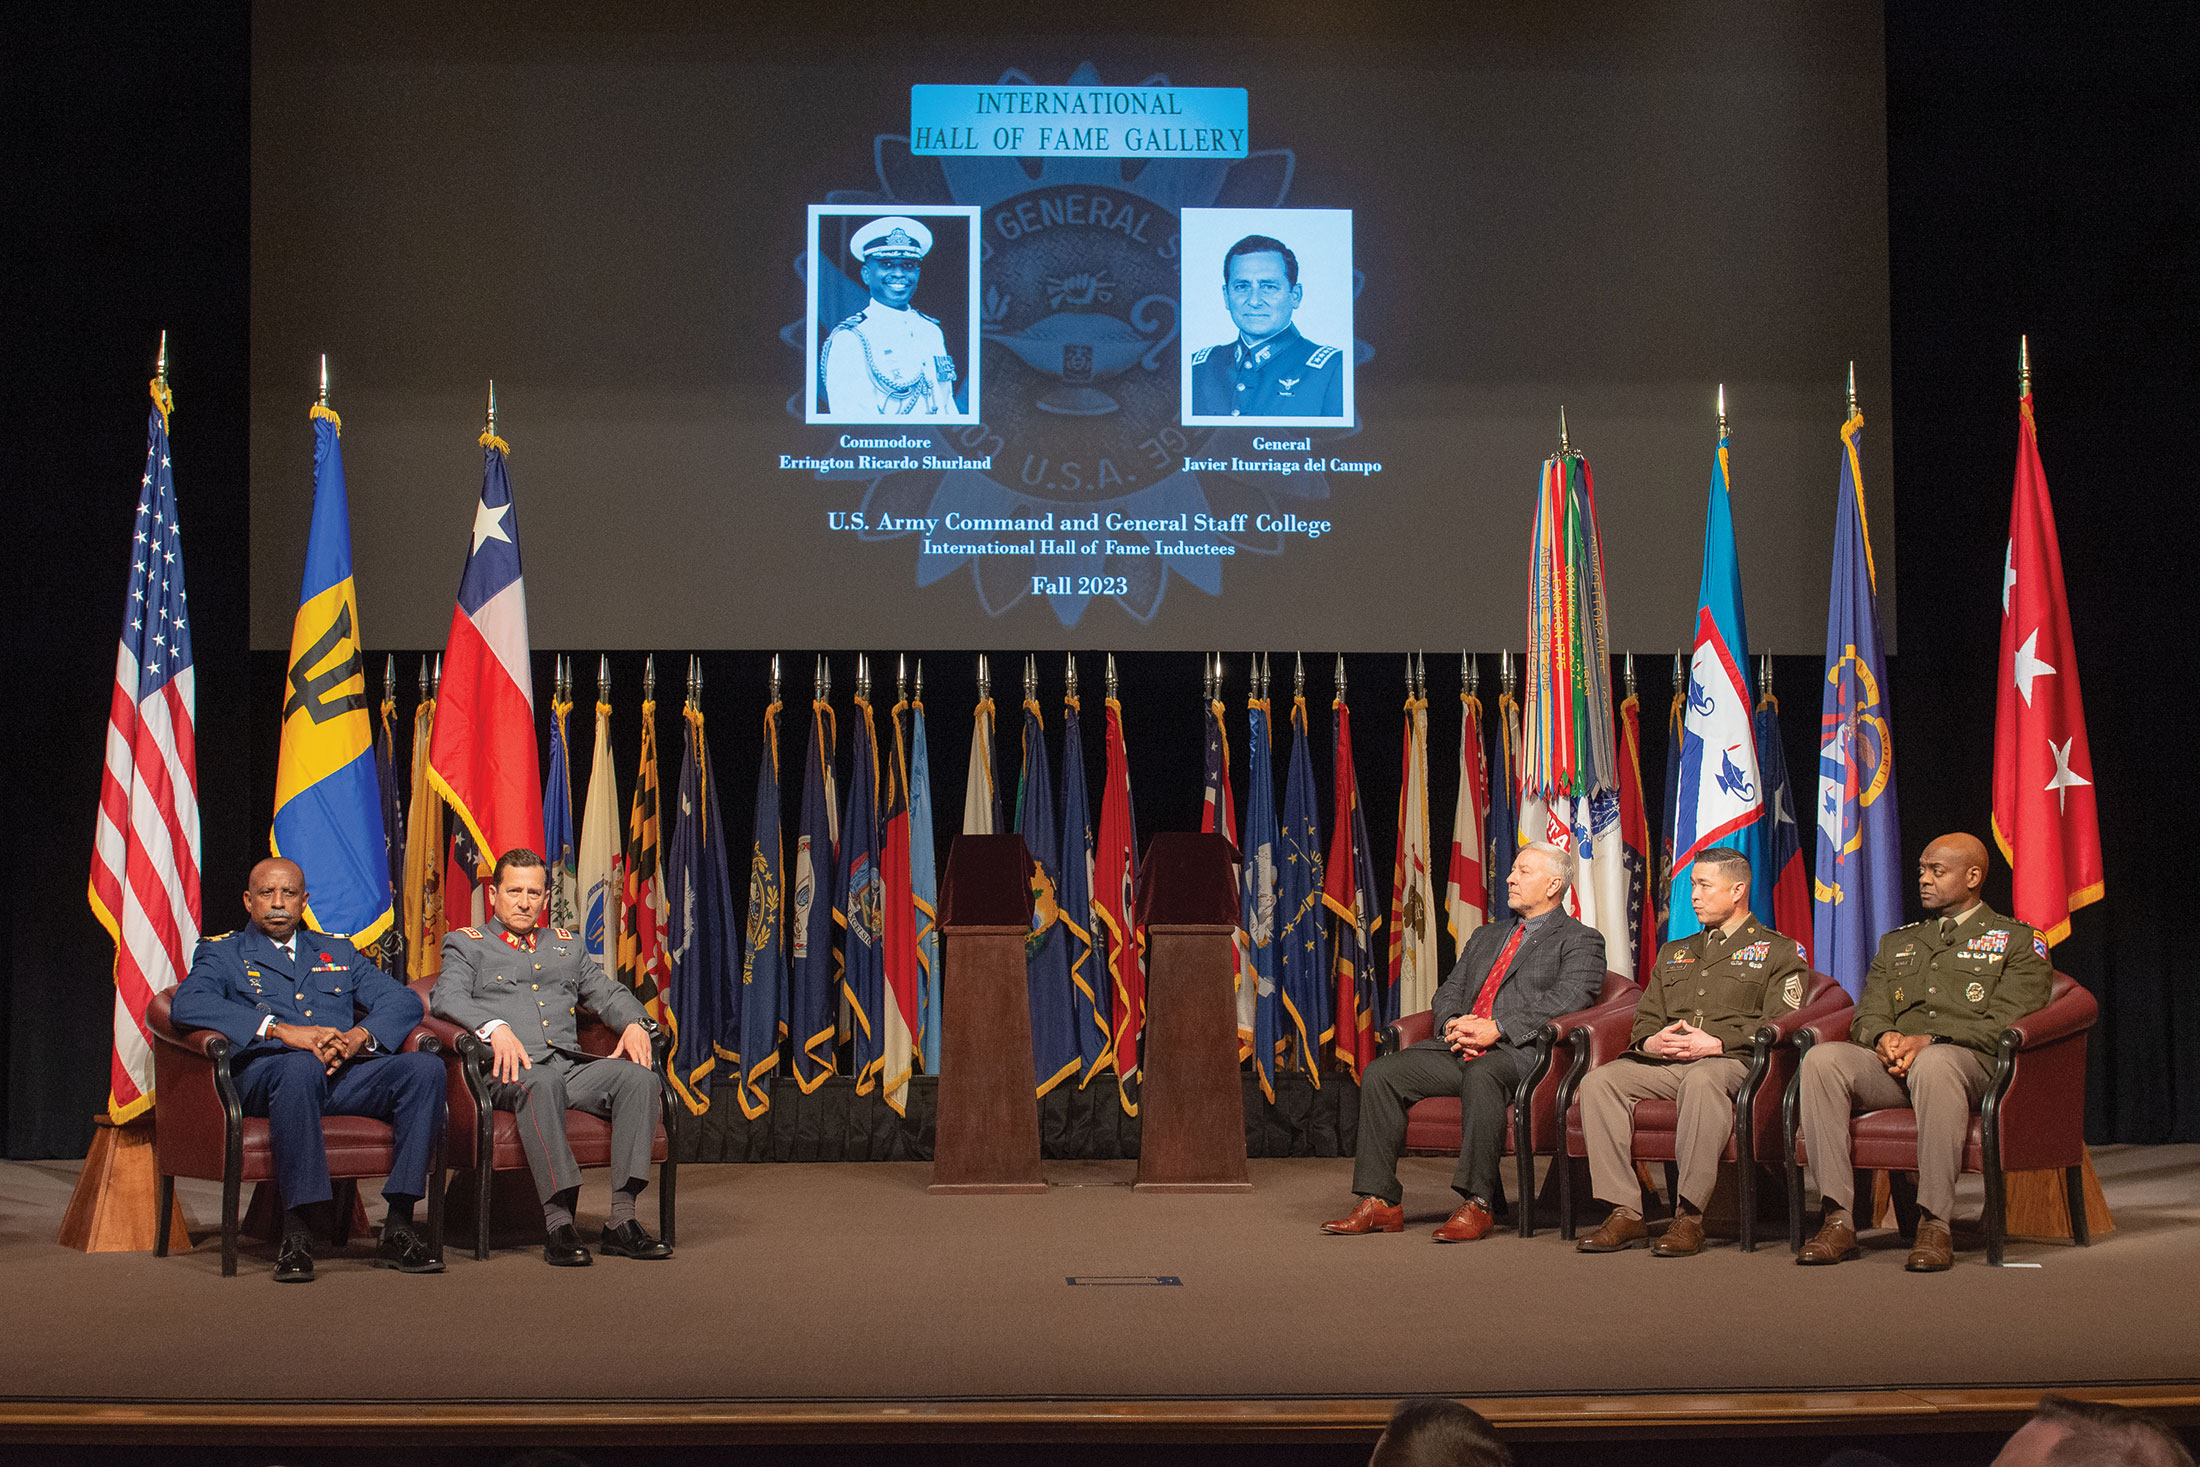 Full stage view photo of the Army University’s Command and General Staff College International Hall of Fame Ceremony on Oct. 31, 2023.